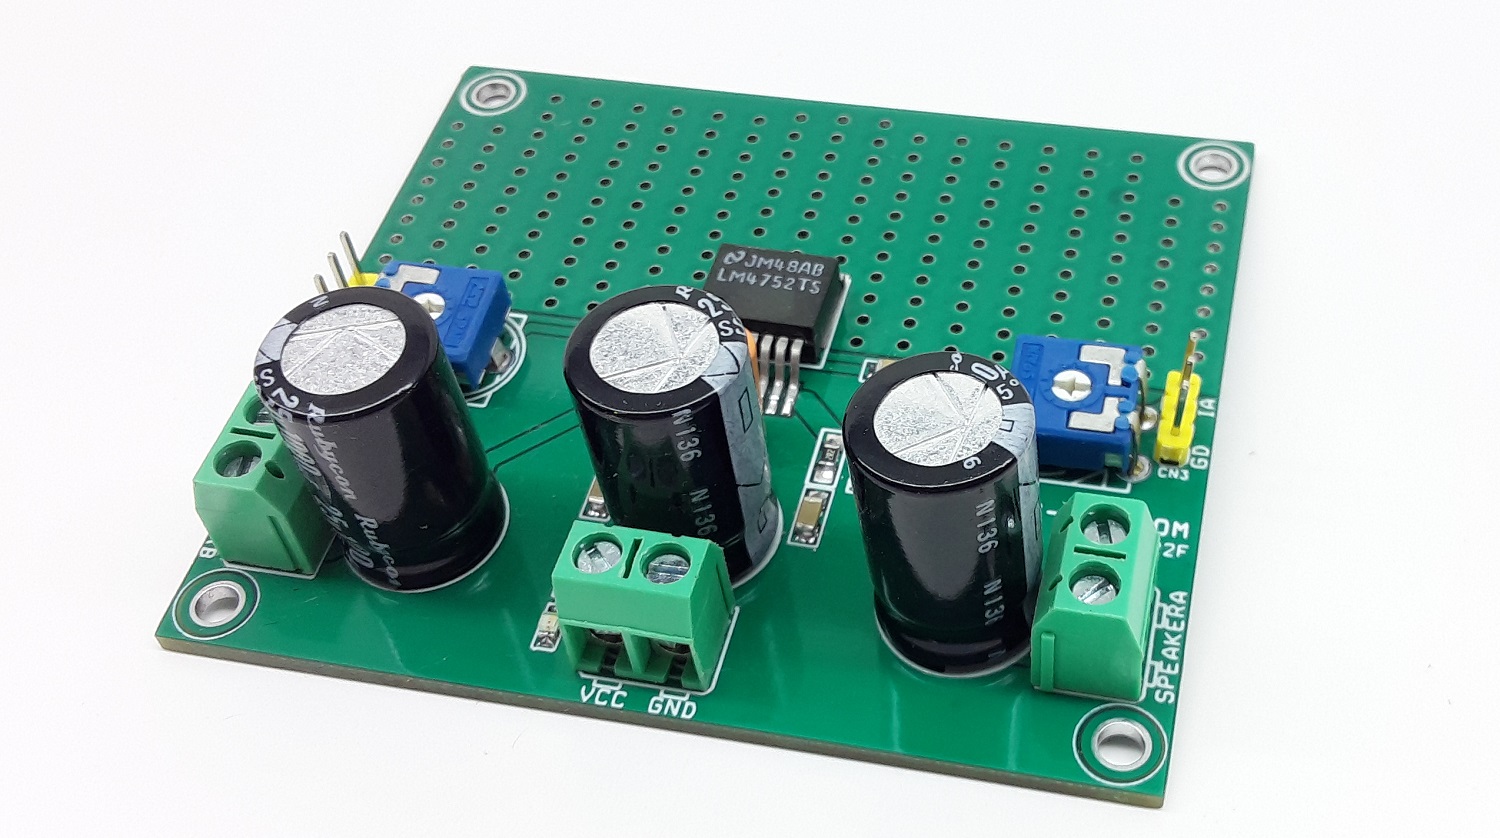 2.5W Stereo Audio Amplifier using LM4752